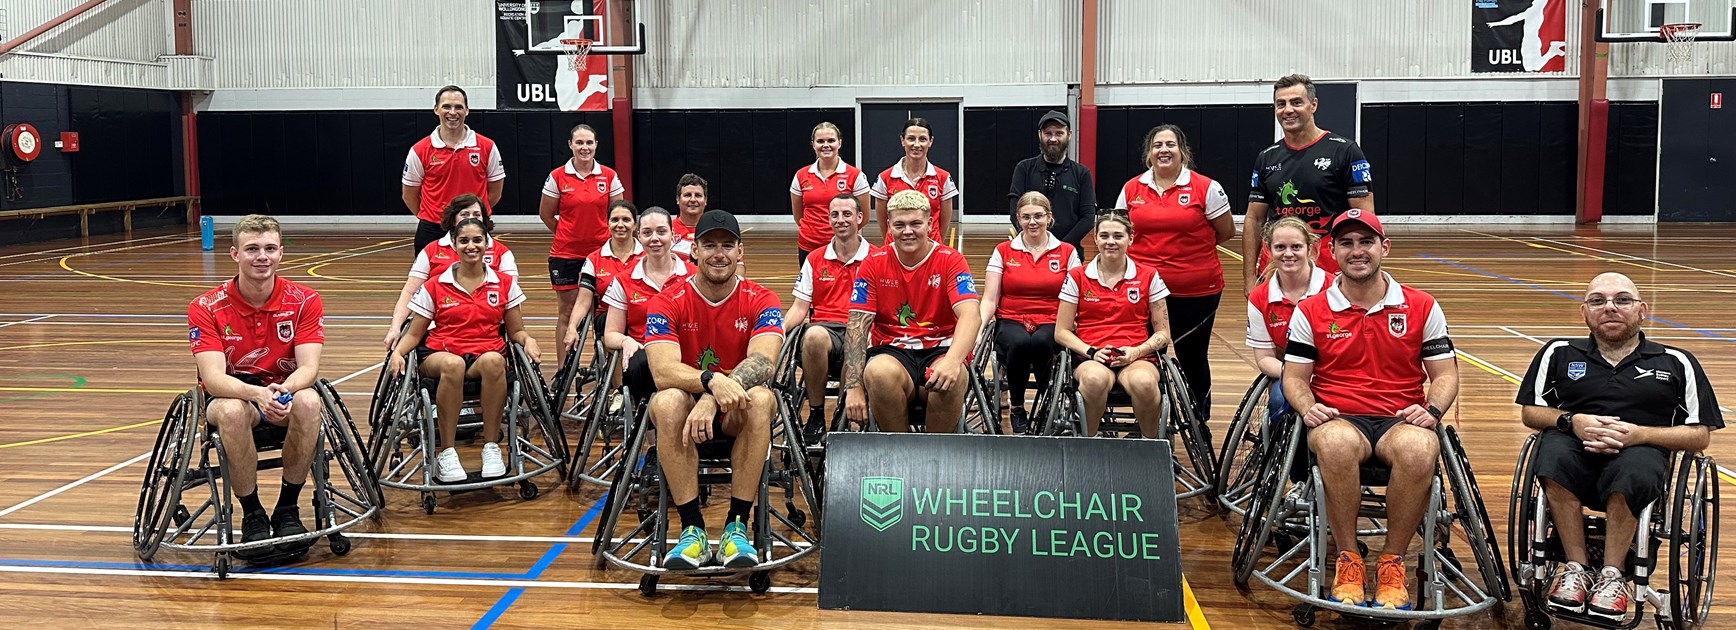 Dragons to partner with Wheelchair Rugby League for 50-50